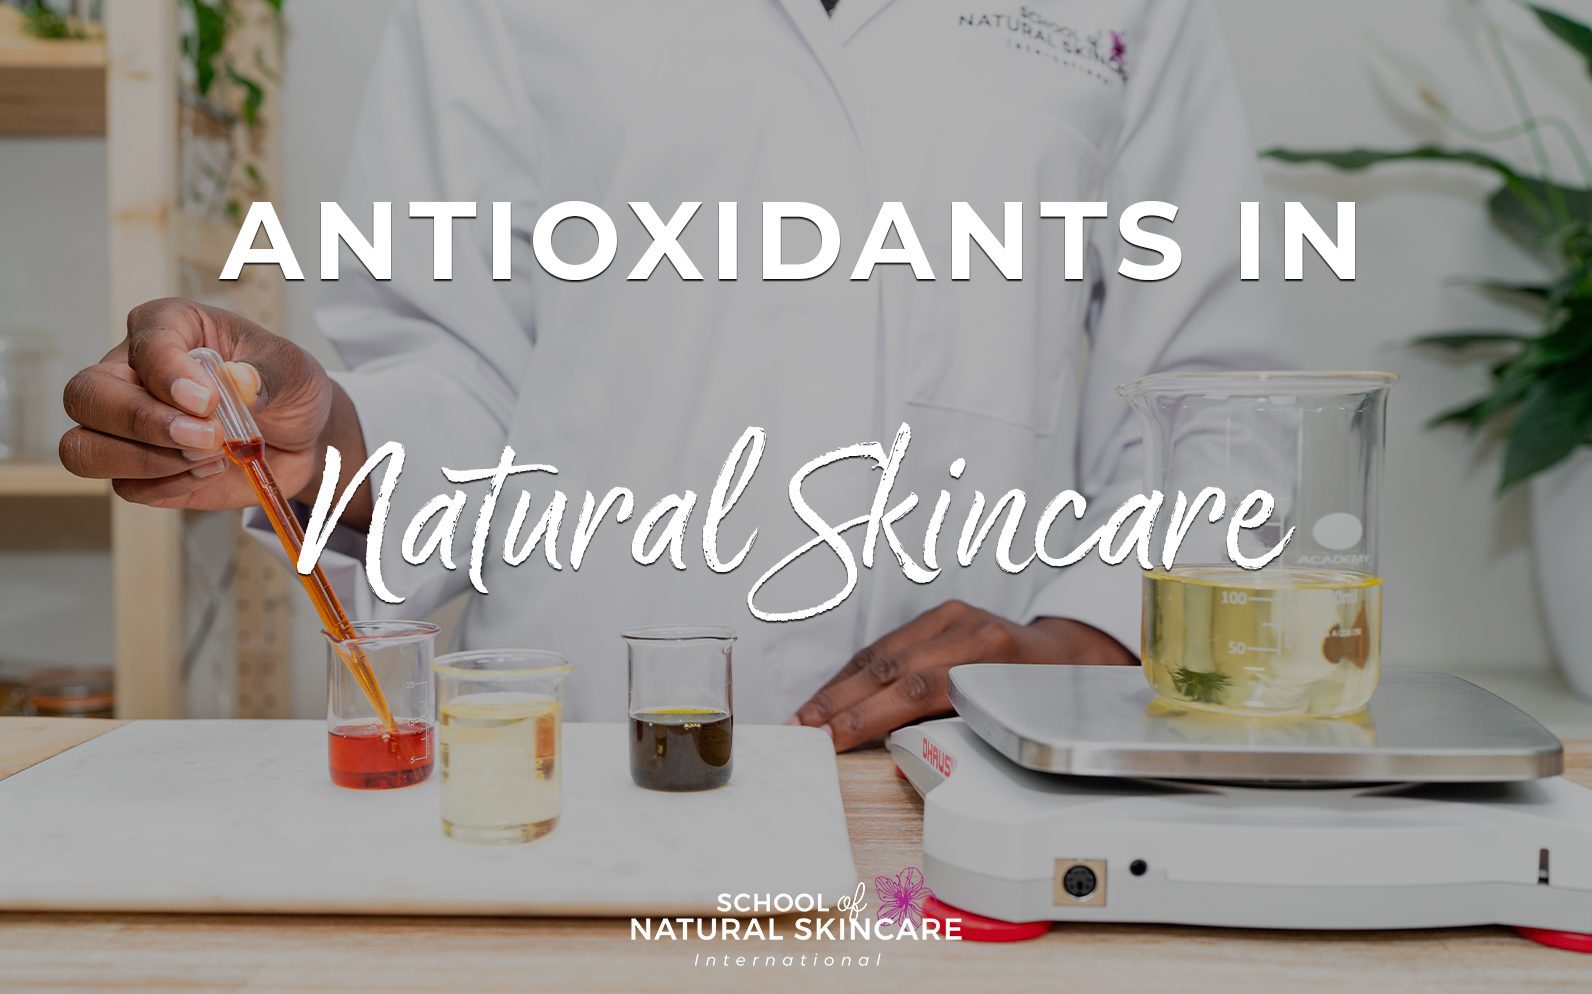 Natural skincare with antioxidants